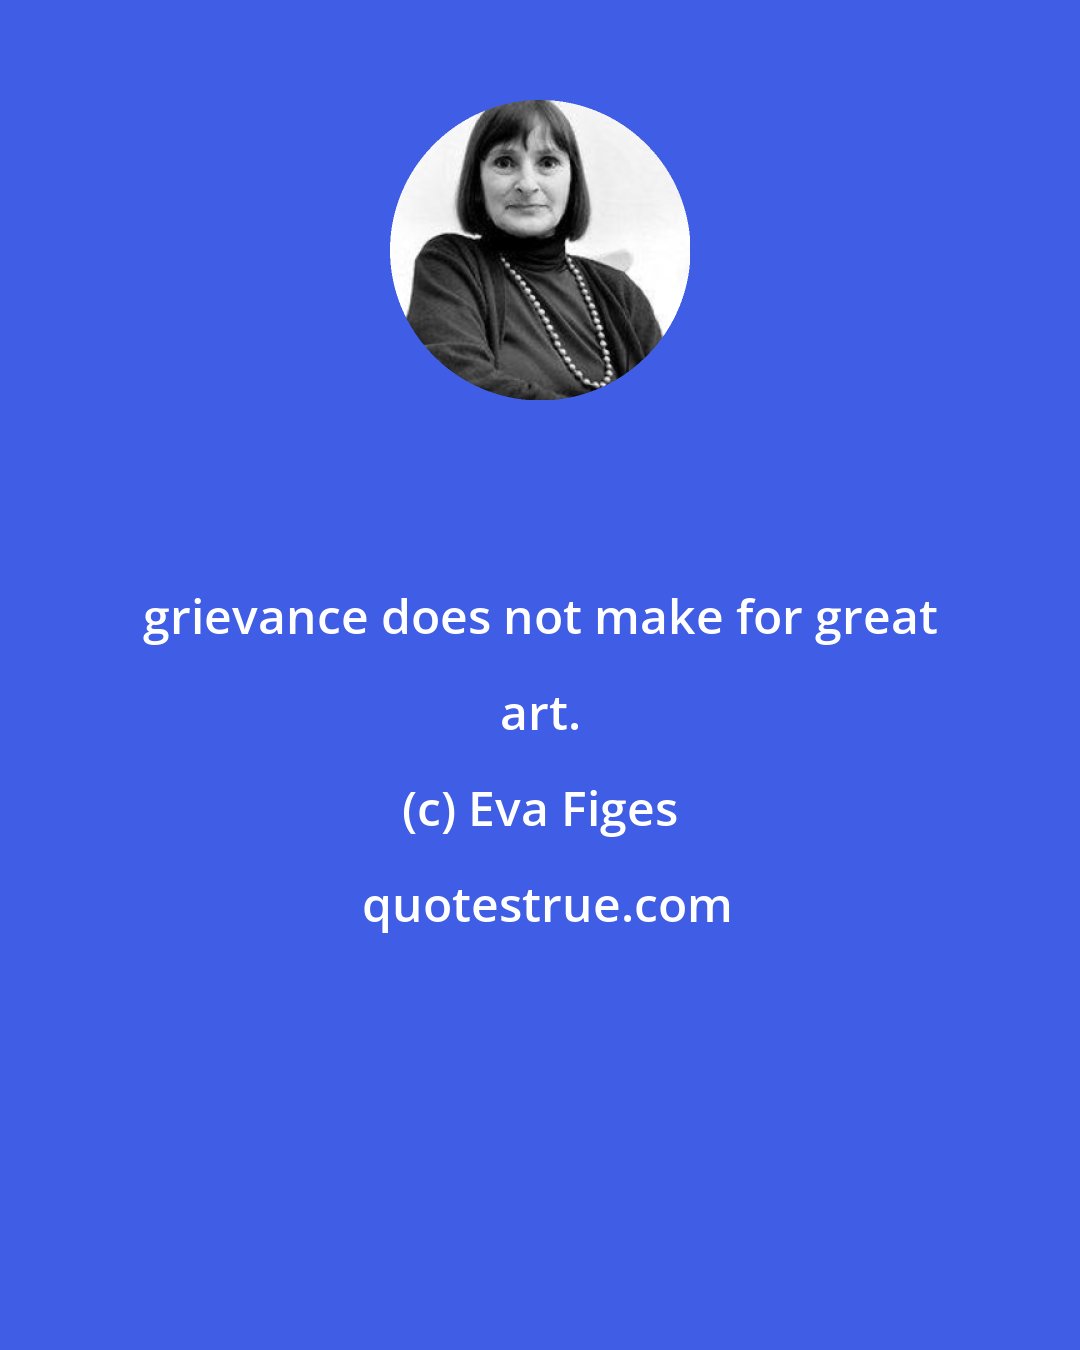 Eva Figes: grievance does not make for great art.